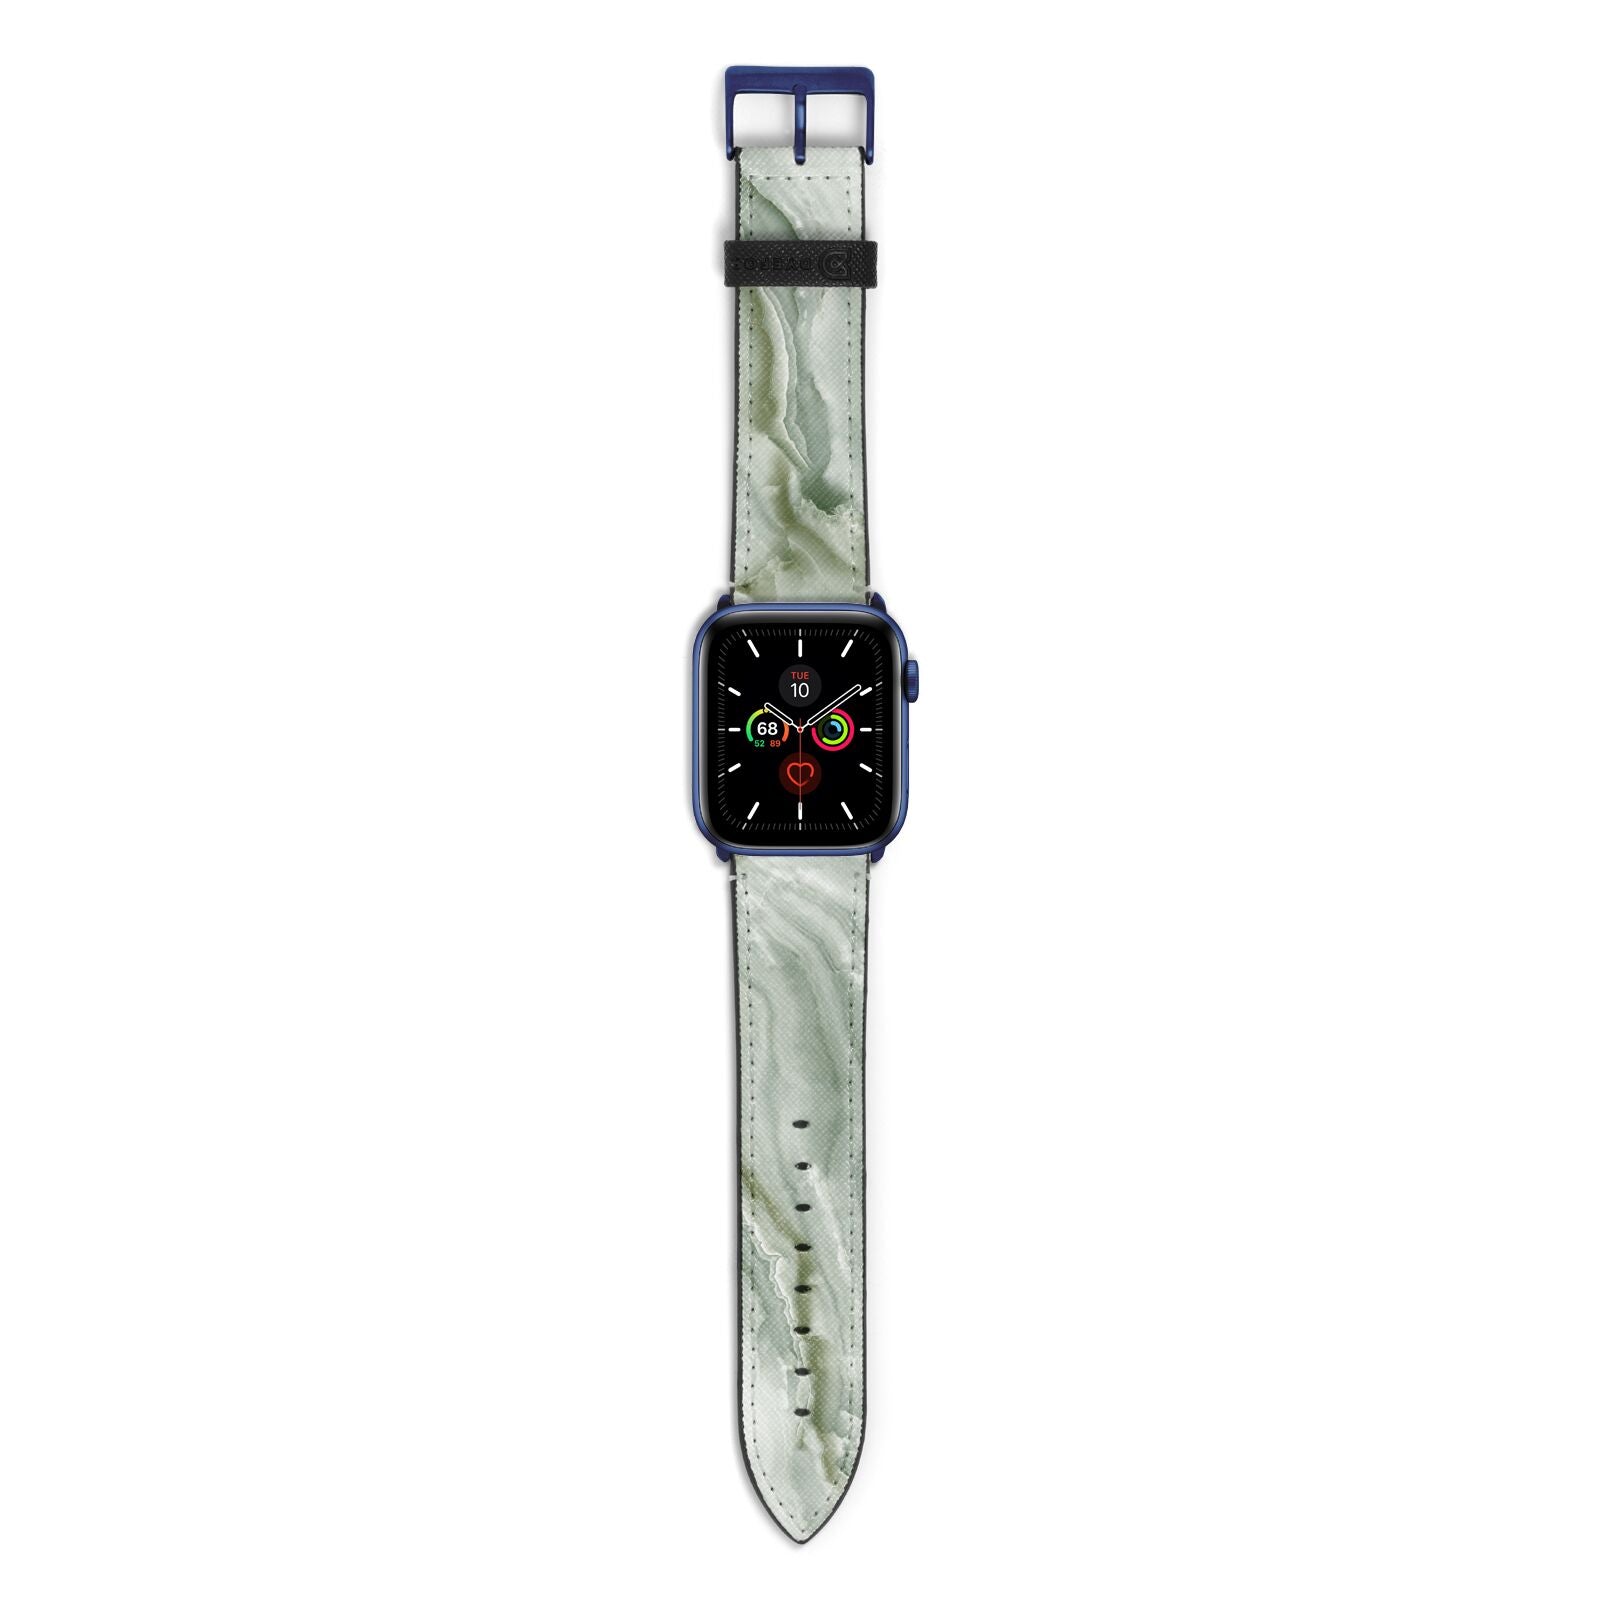 Pistachio Green Marble Apple Watch Strap with Blue Hardware